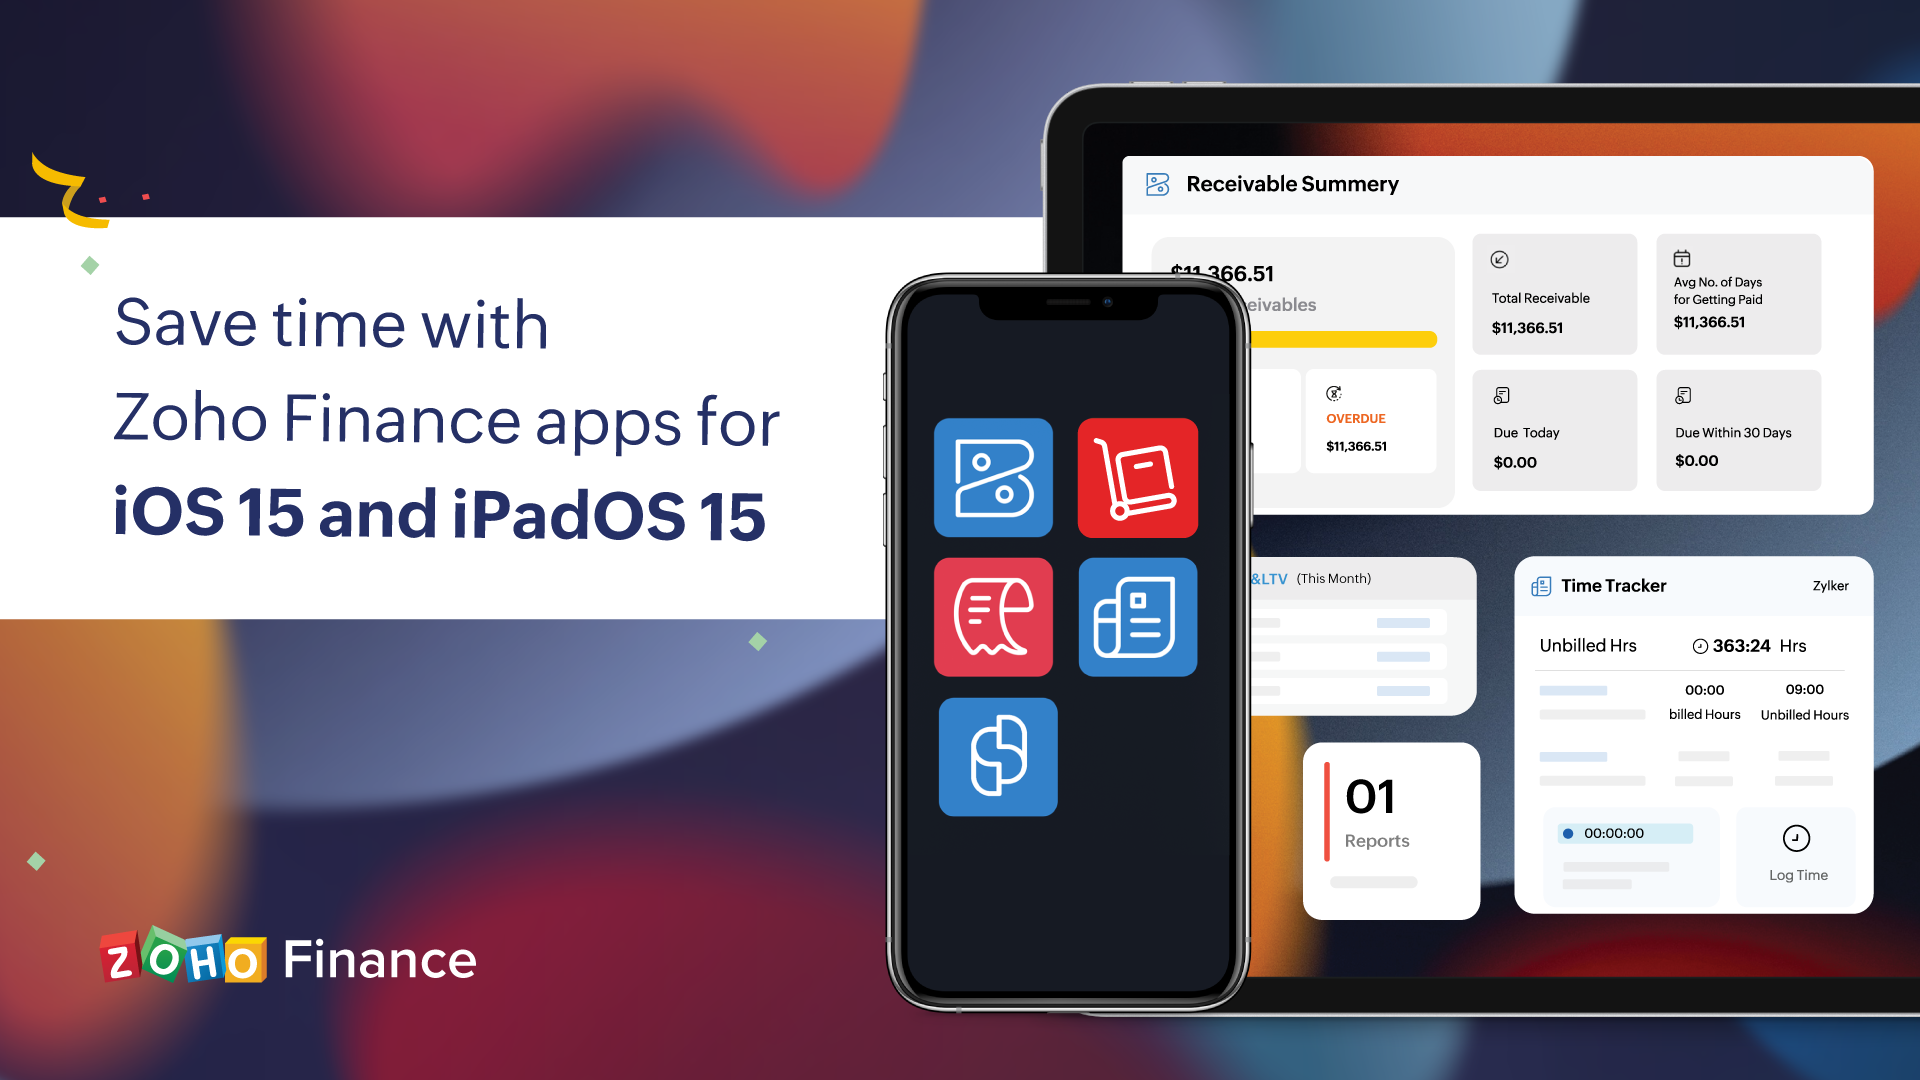 Zoho Finance updates for iOS 15 and iPadOS 15